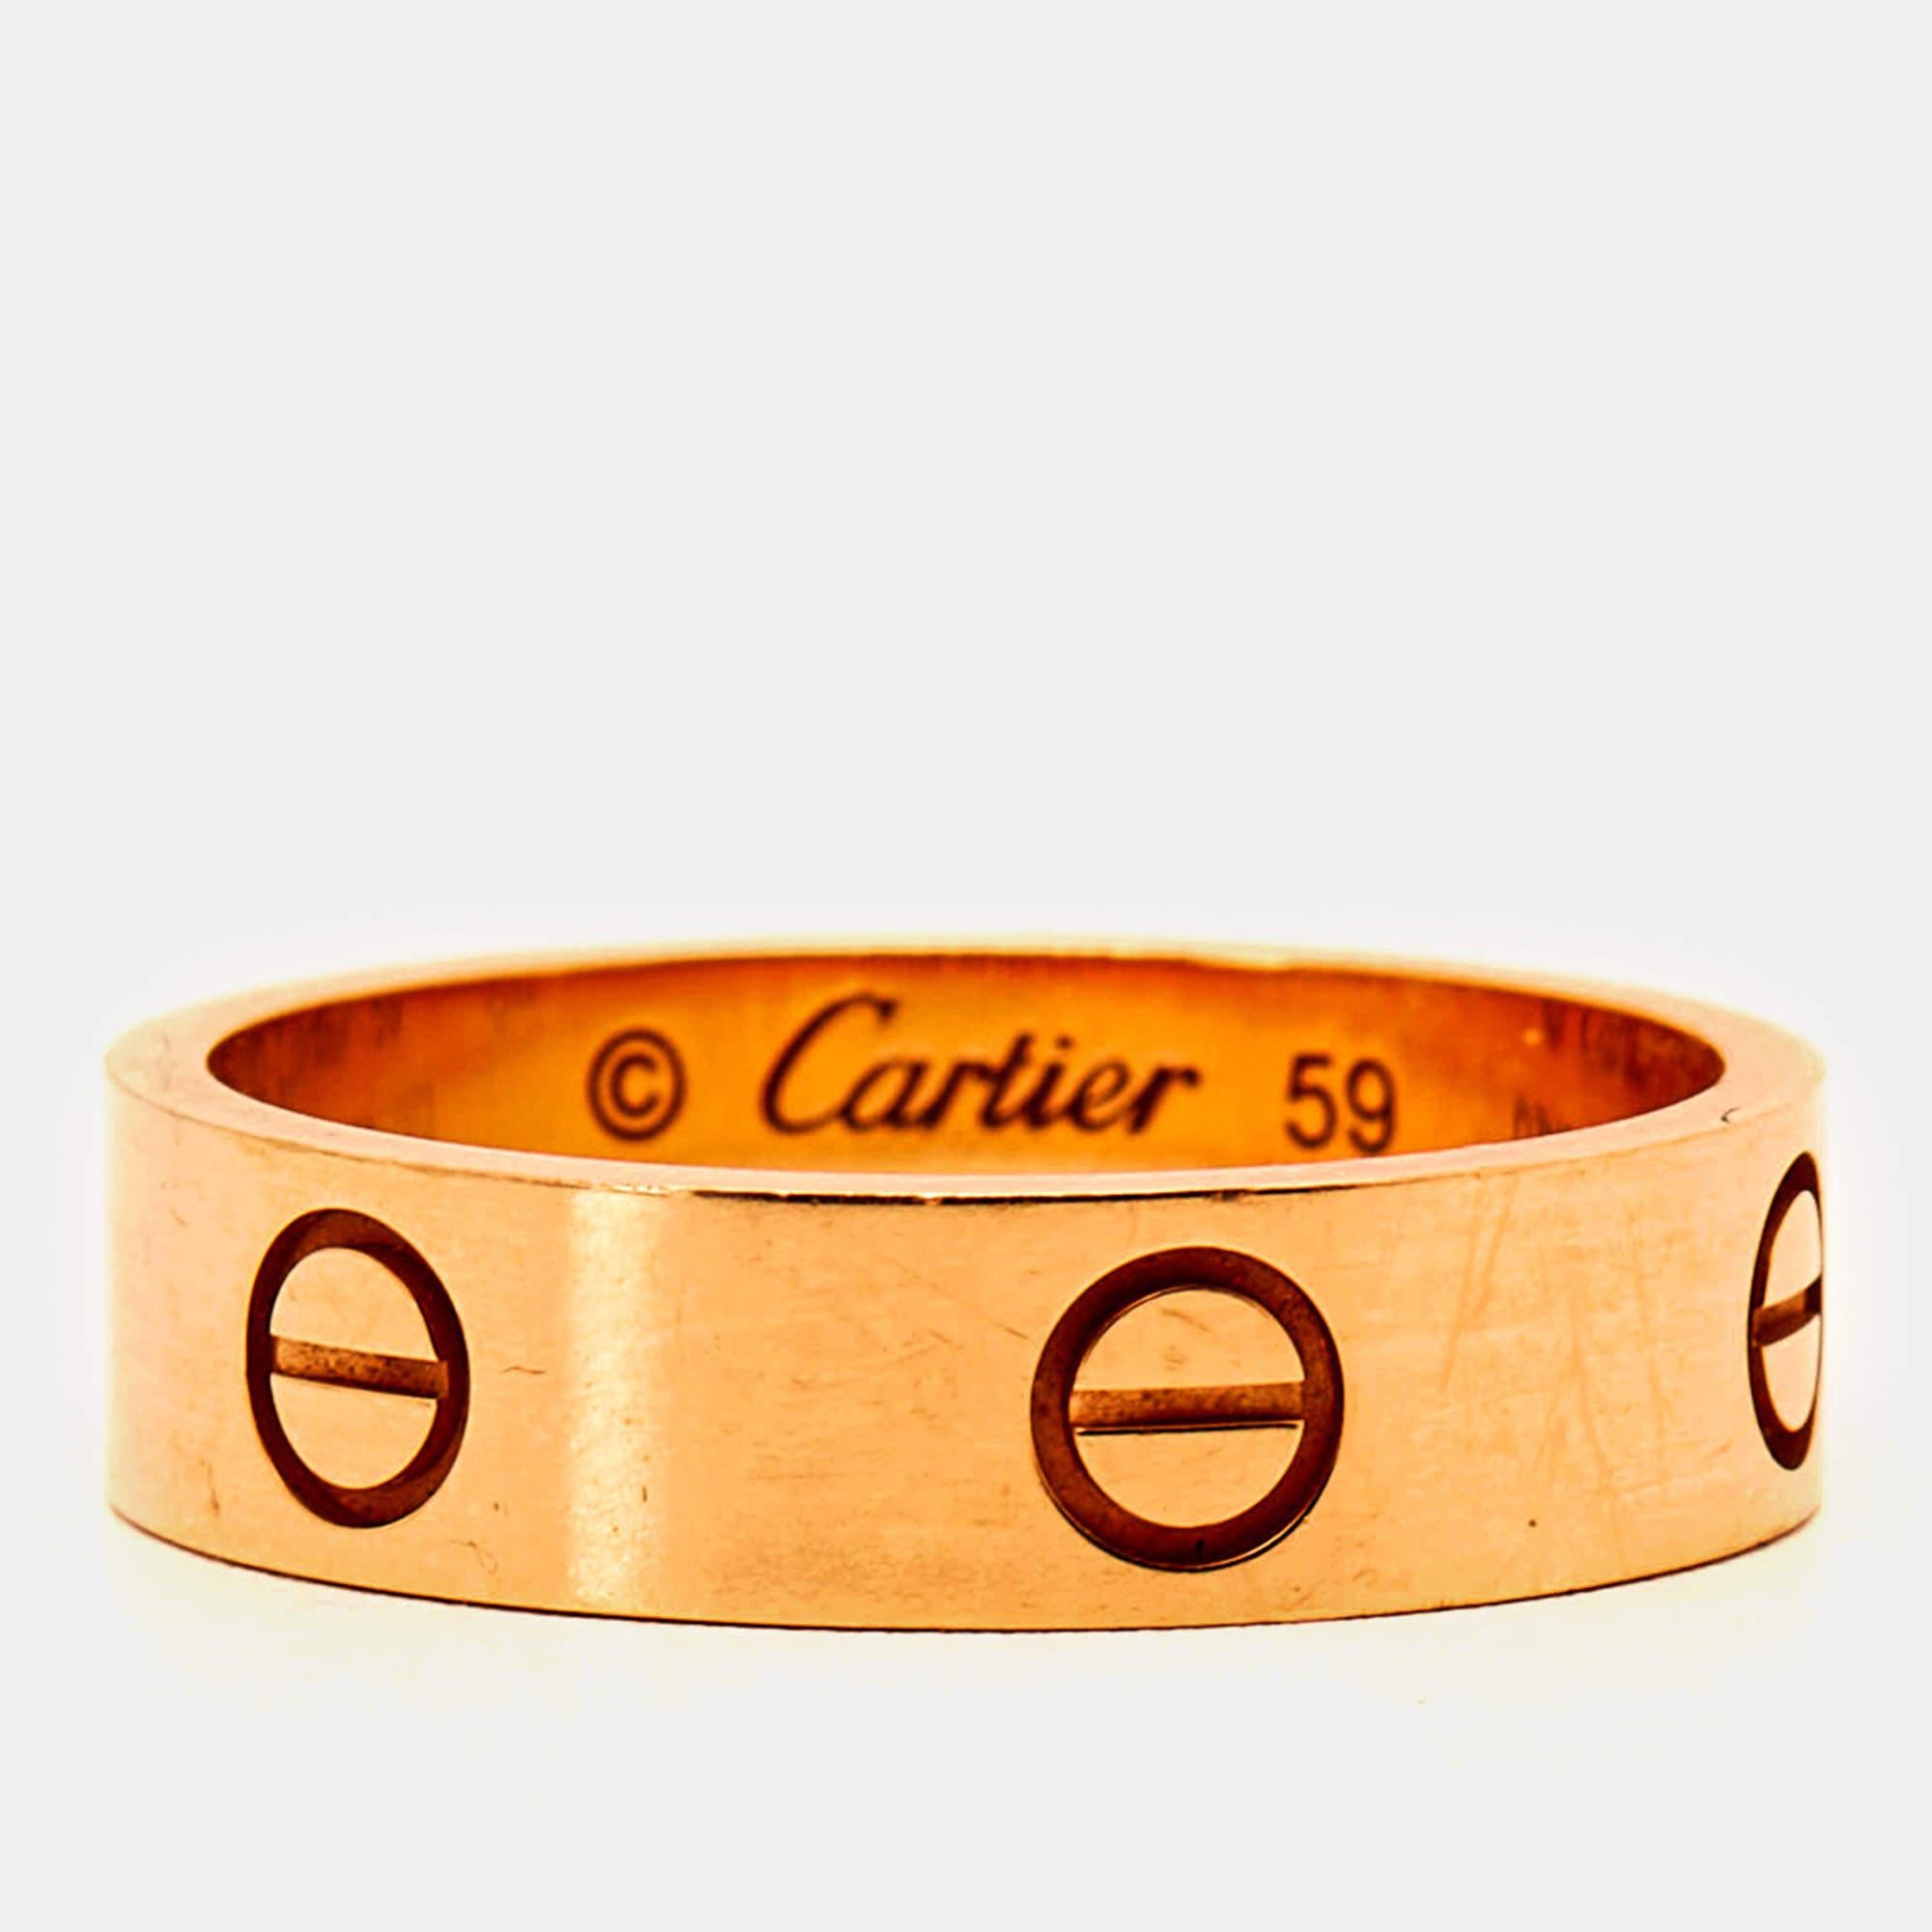 The Cartier ring exudes timeless elegance with its iconic screw motifs symbolizing eternal love. Crafted from lustrous 18k rose gold, this luxurious piece seamlessly combines sophistication and modernity, making it a symbol of enduring commitment